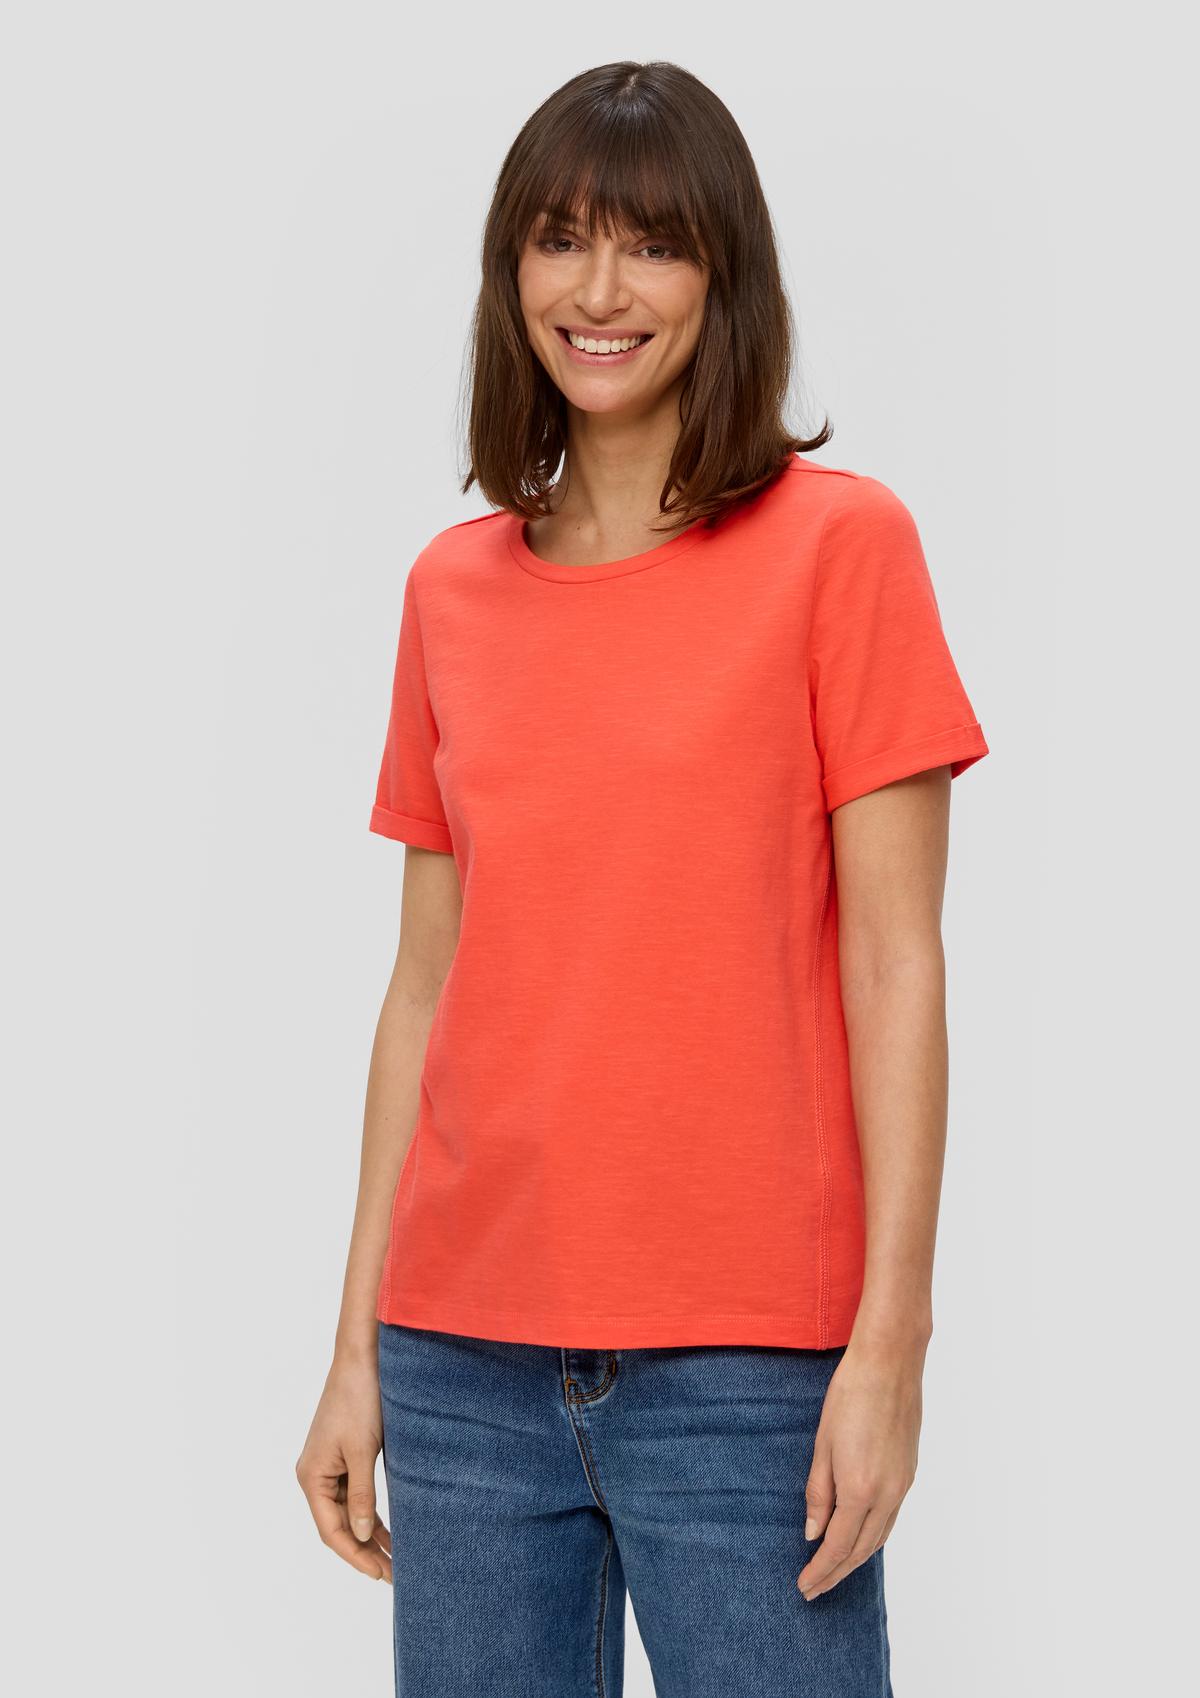 T-shirt with side seams